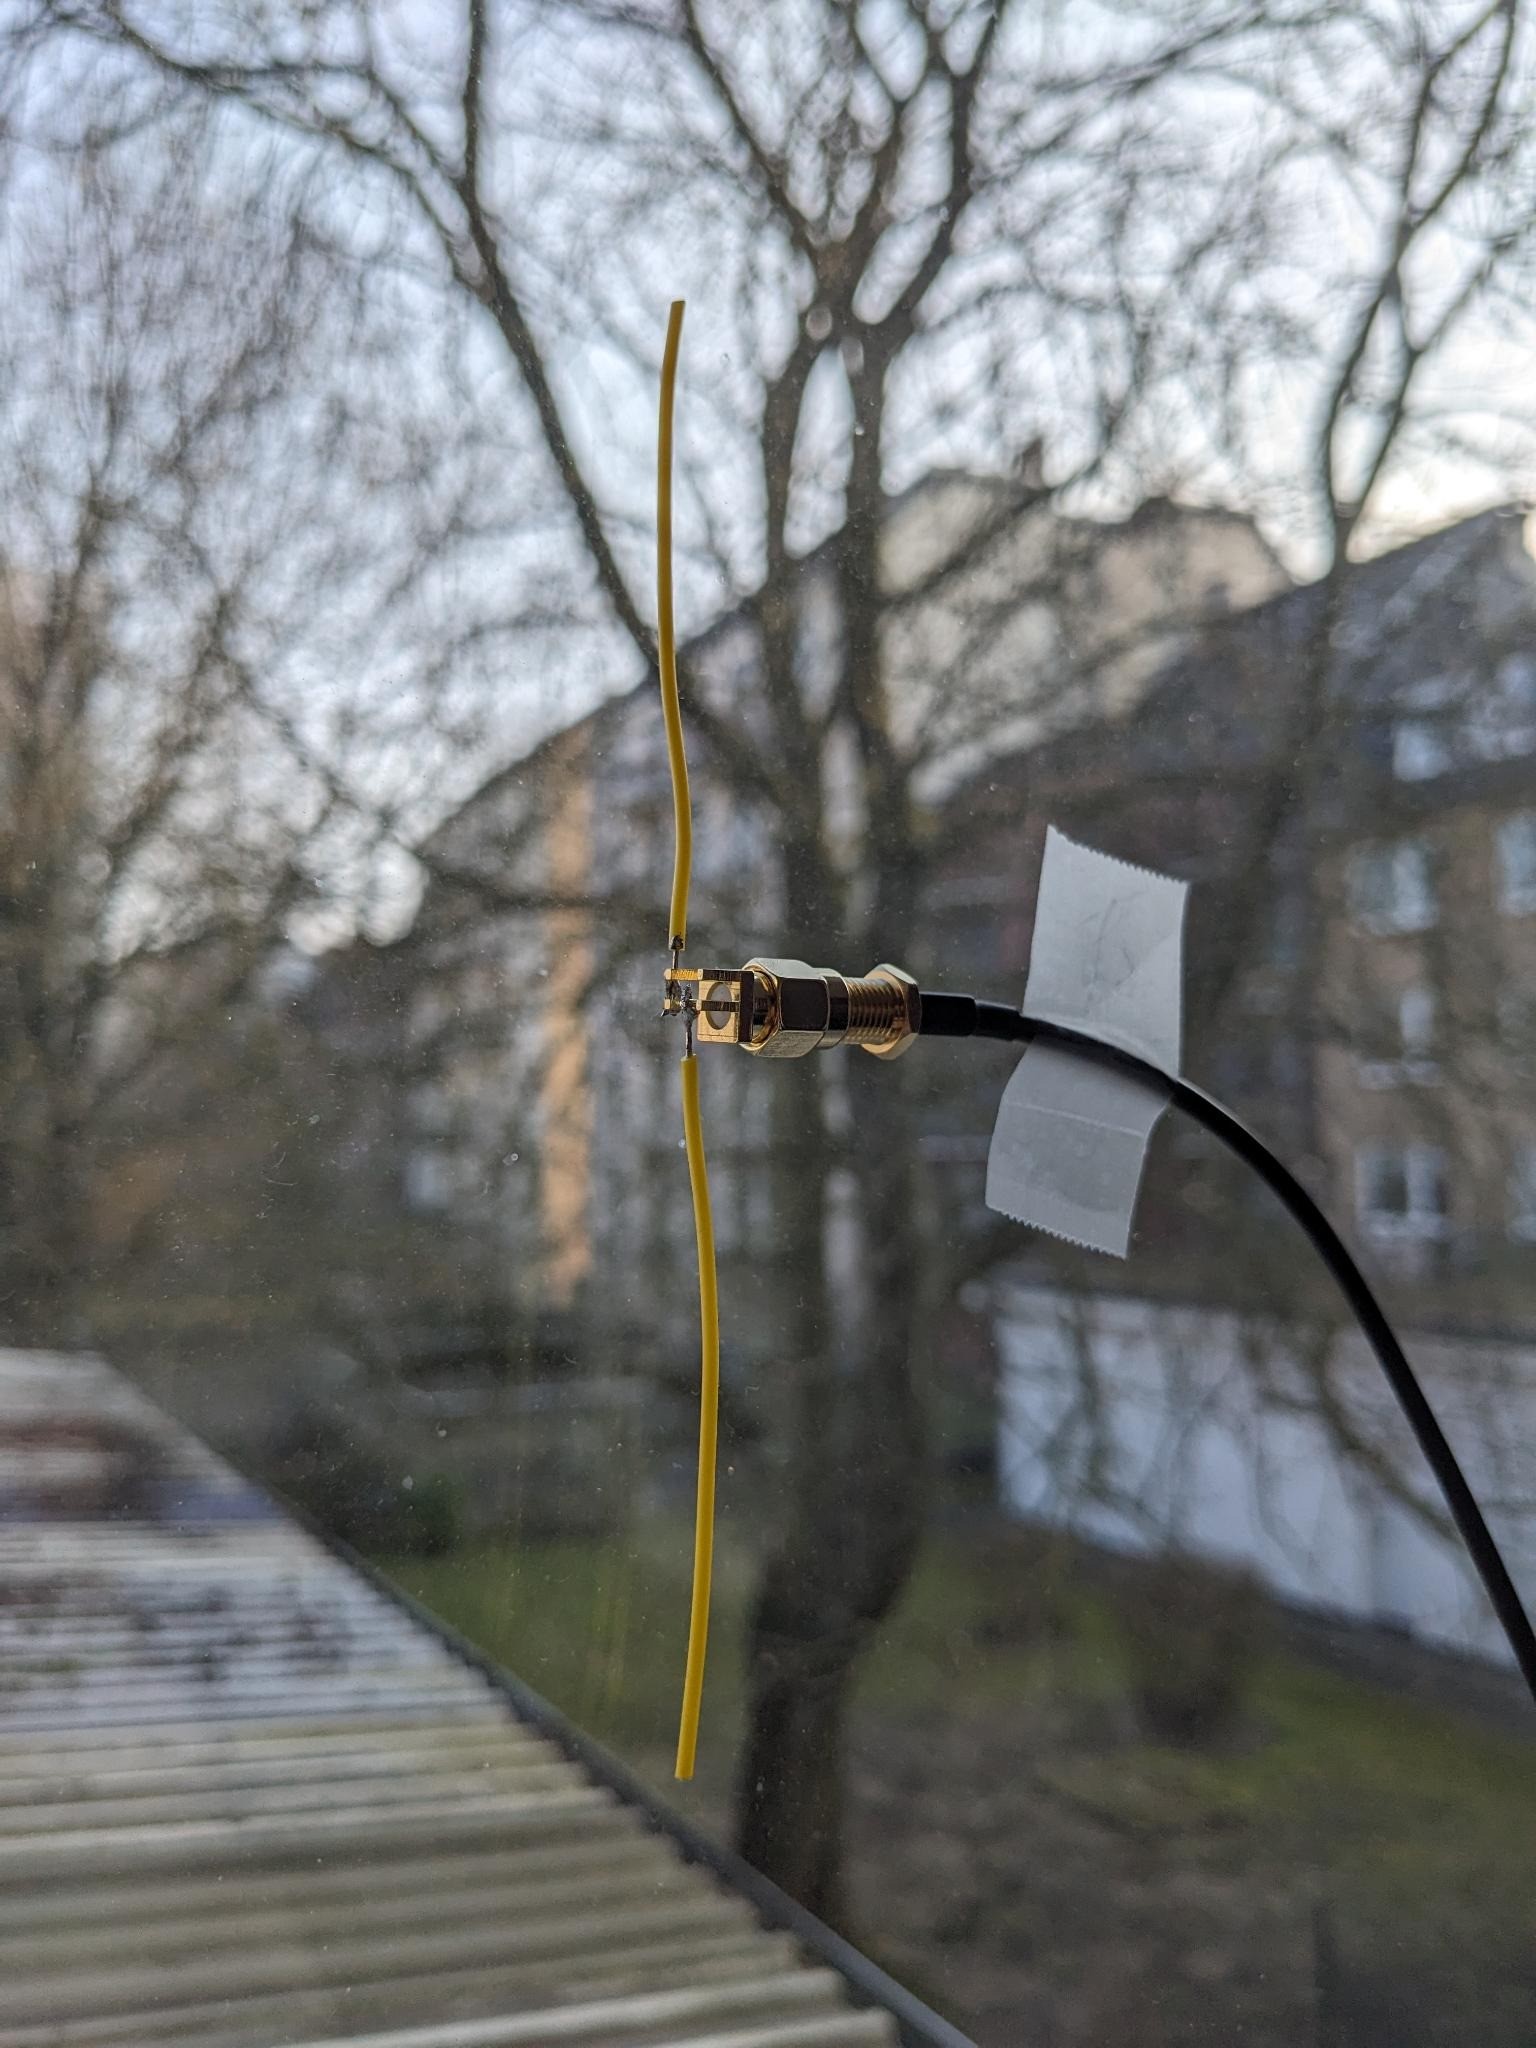 A antenna made from two short wires.